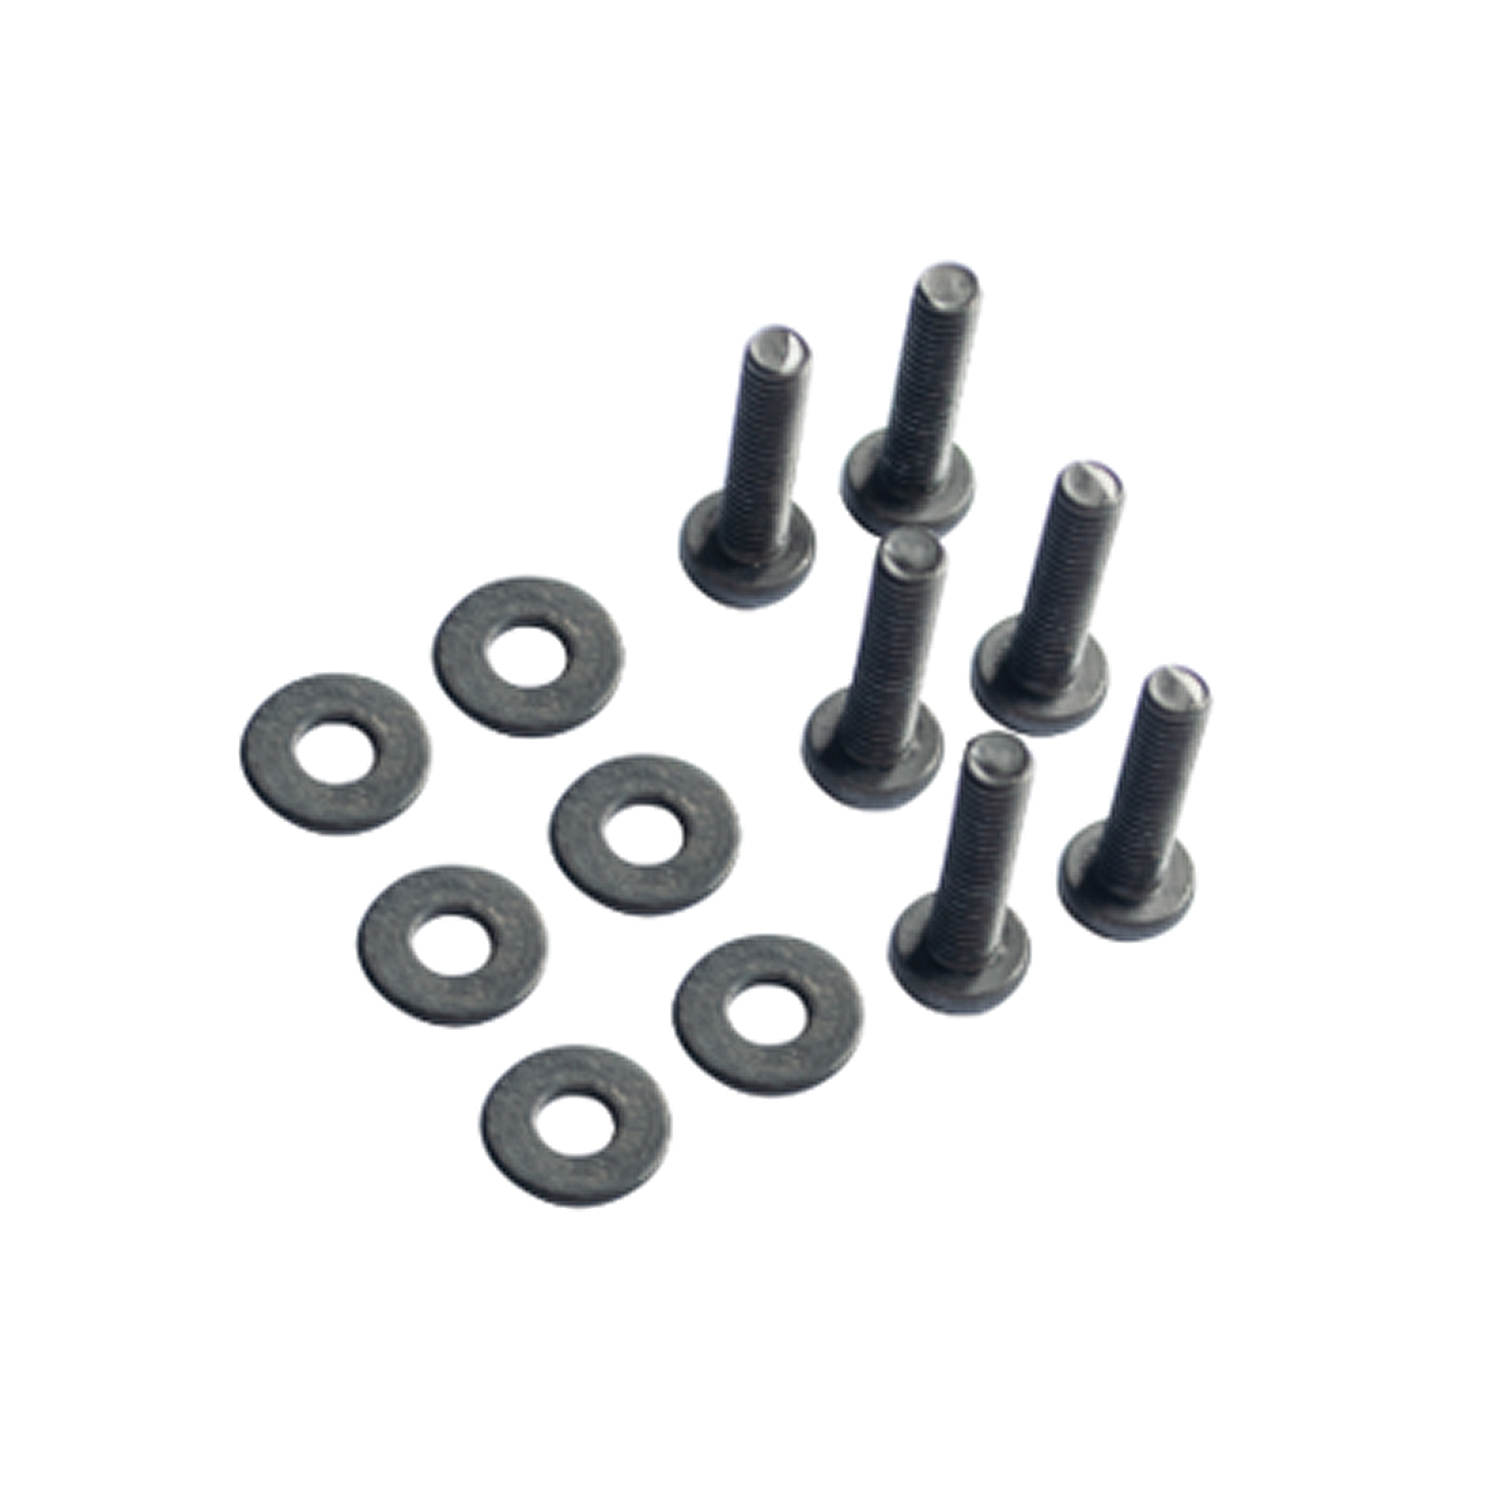 For TG-BC1H9065 (Honda Ridgeline) Only - Screws and Washers Set | 6 Sets | SP-BC1028